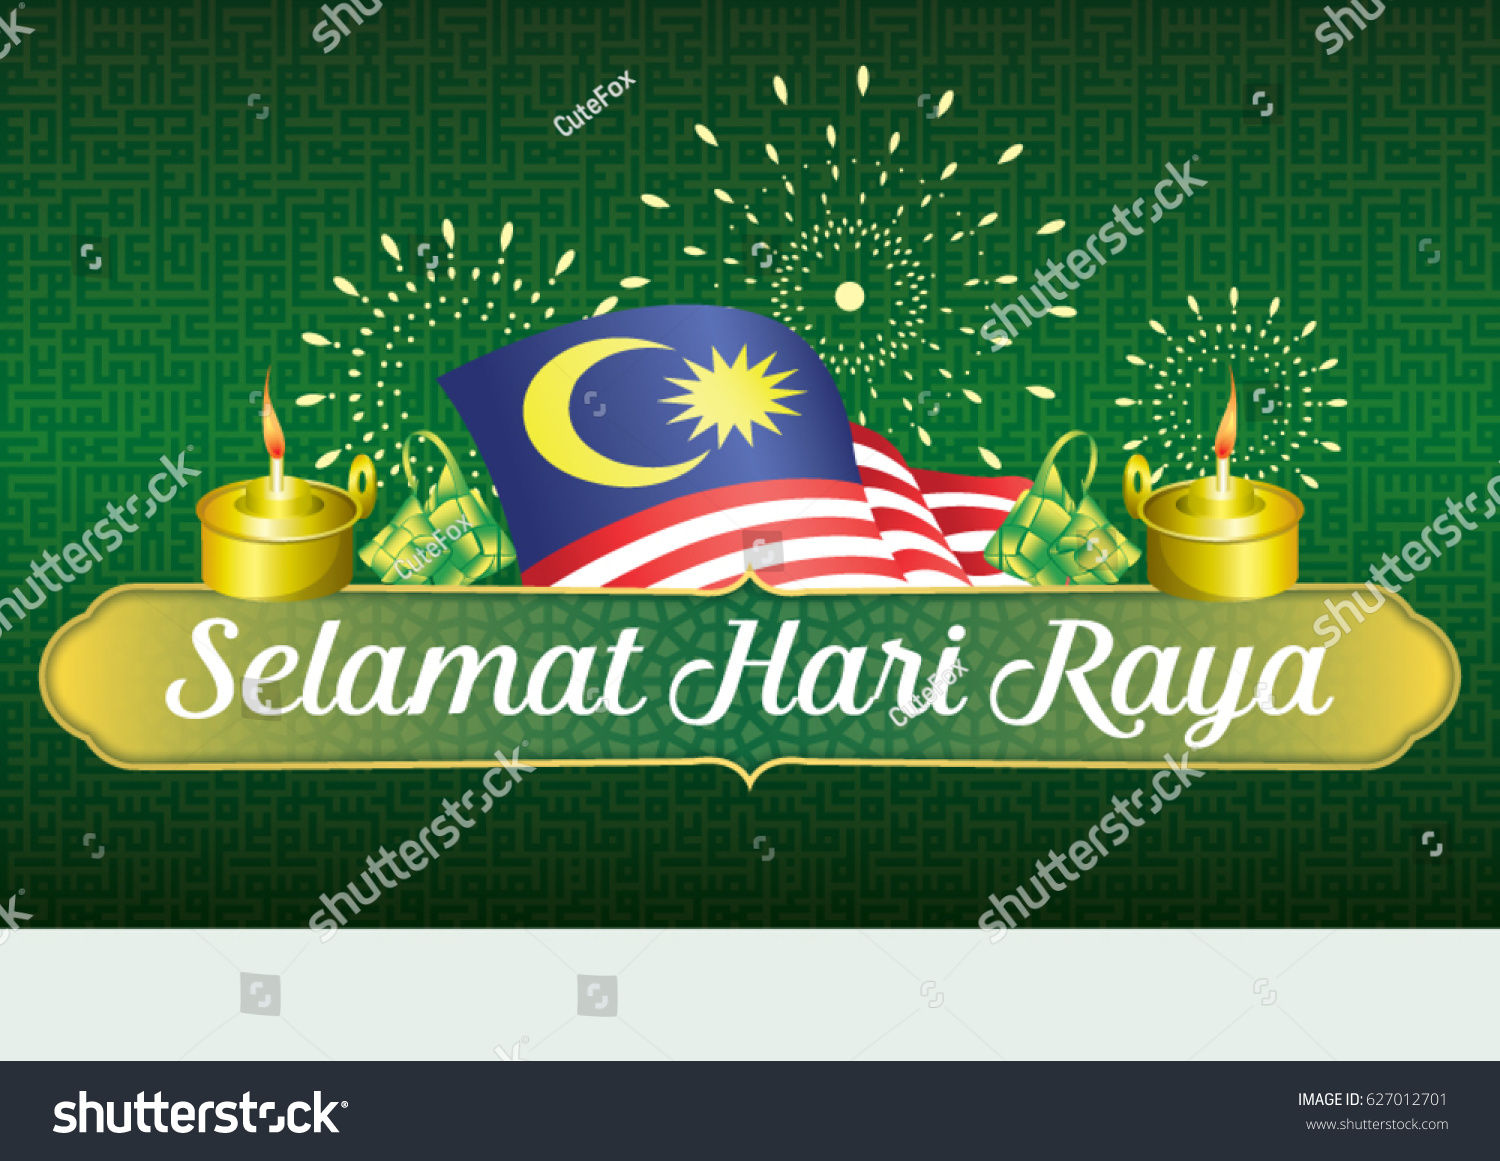 Yougov Hari Raya As The Major Family Time In Indonesia And Malaysia During The Year Says Yougov Poll